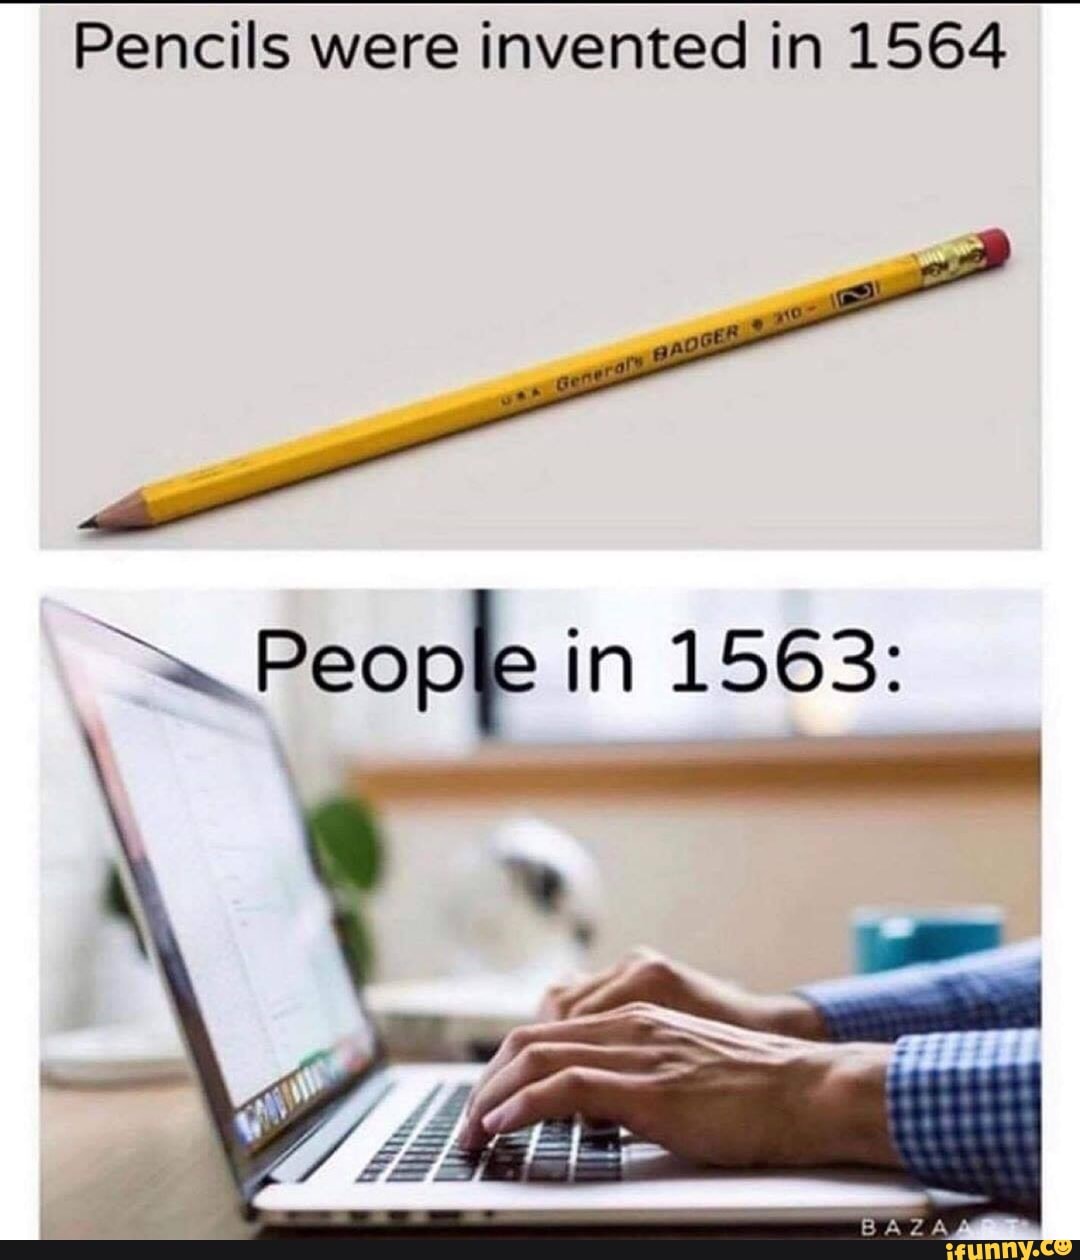 how were pencils invented